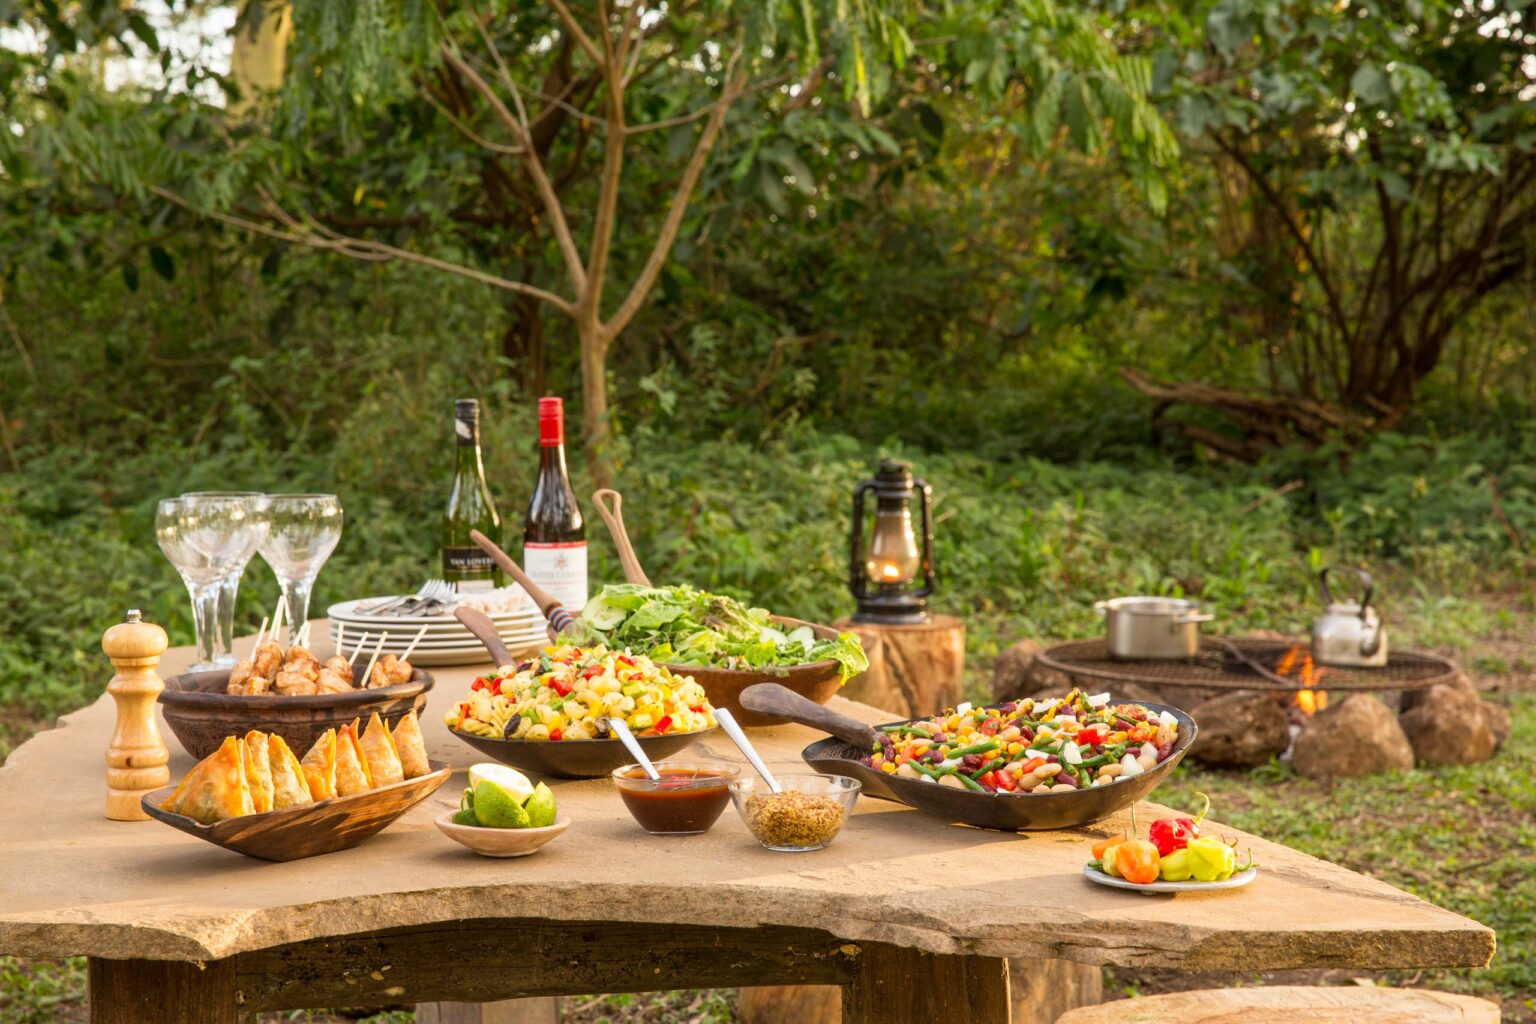 An outdoor dining table set with food and drinks.